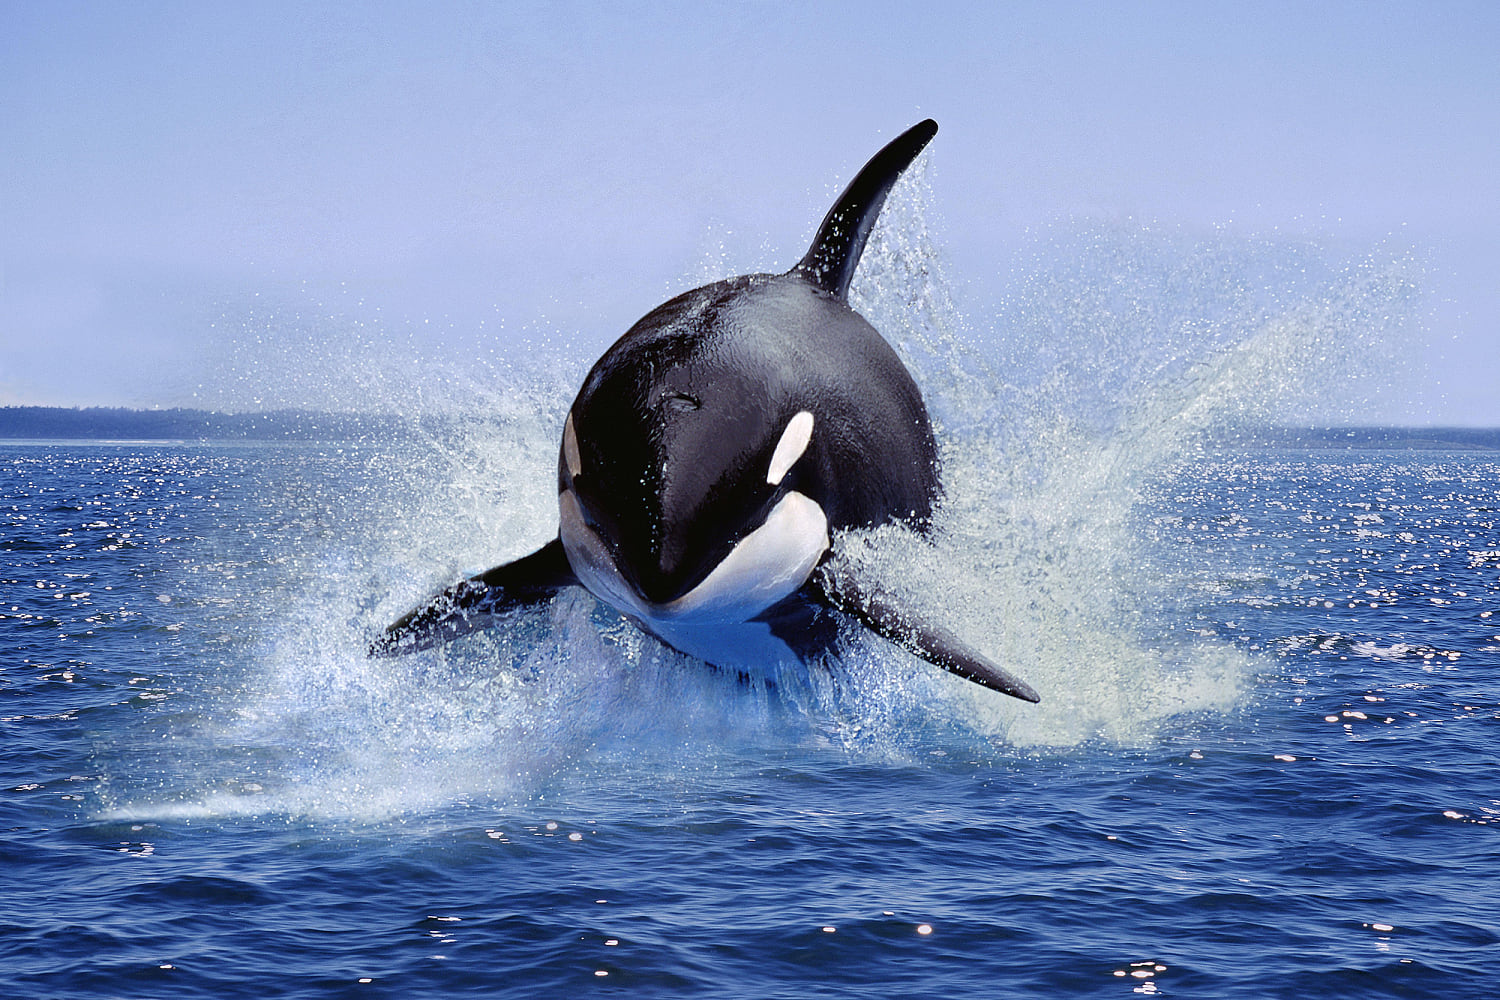 What's really going on with the killer whales who keep sinking our boats